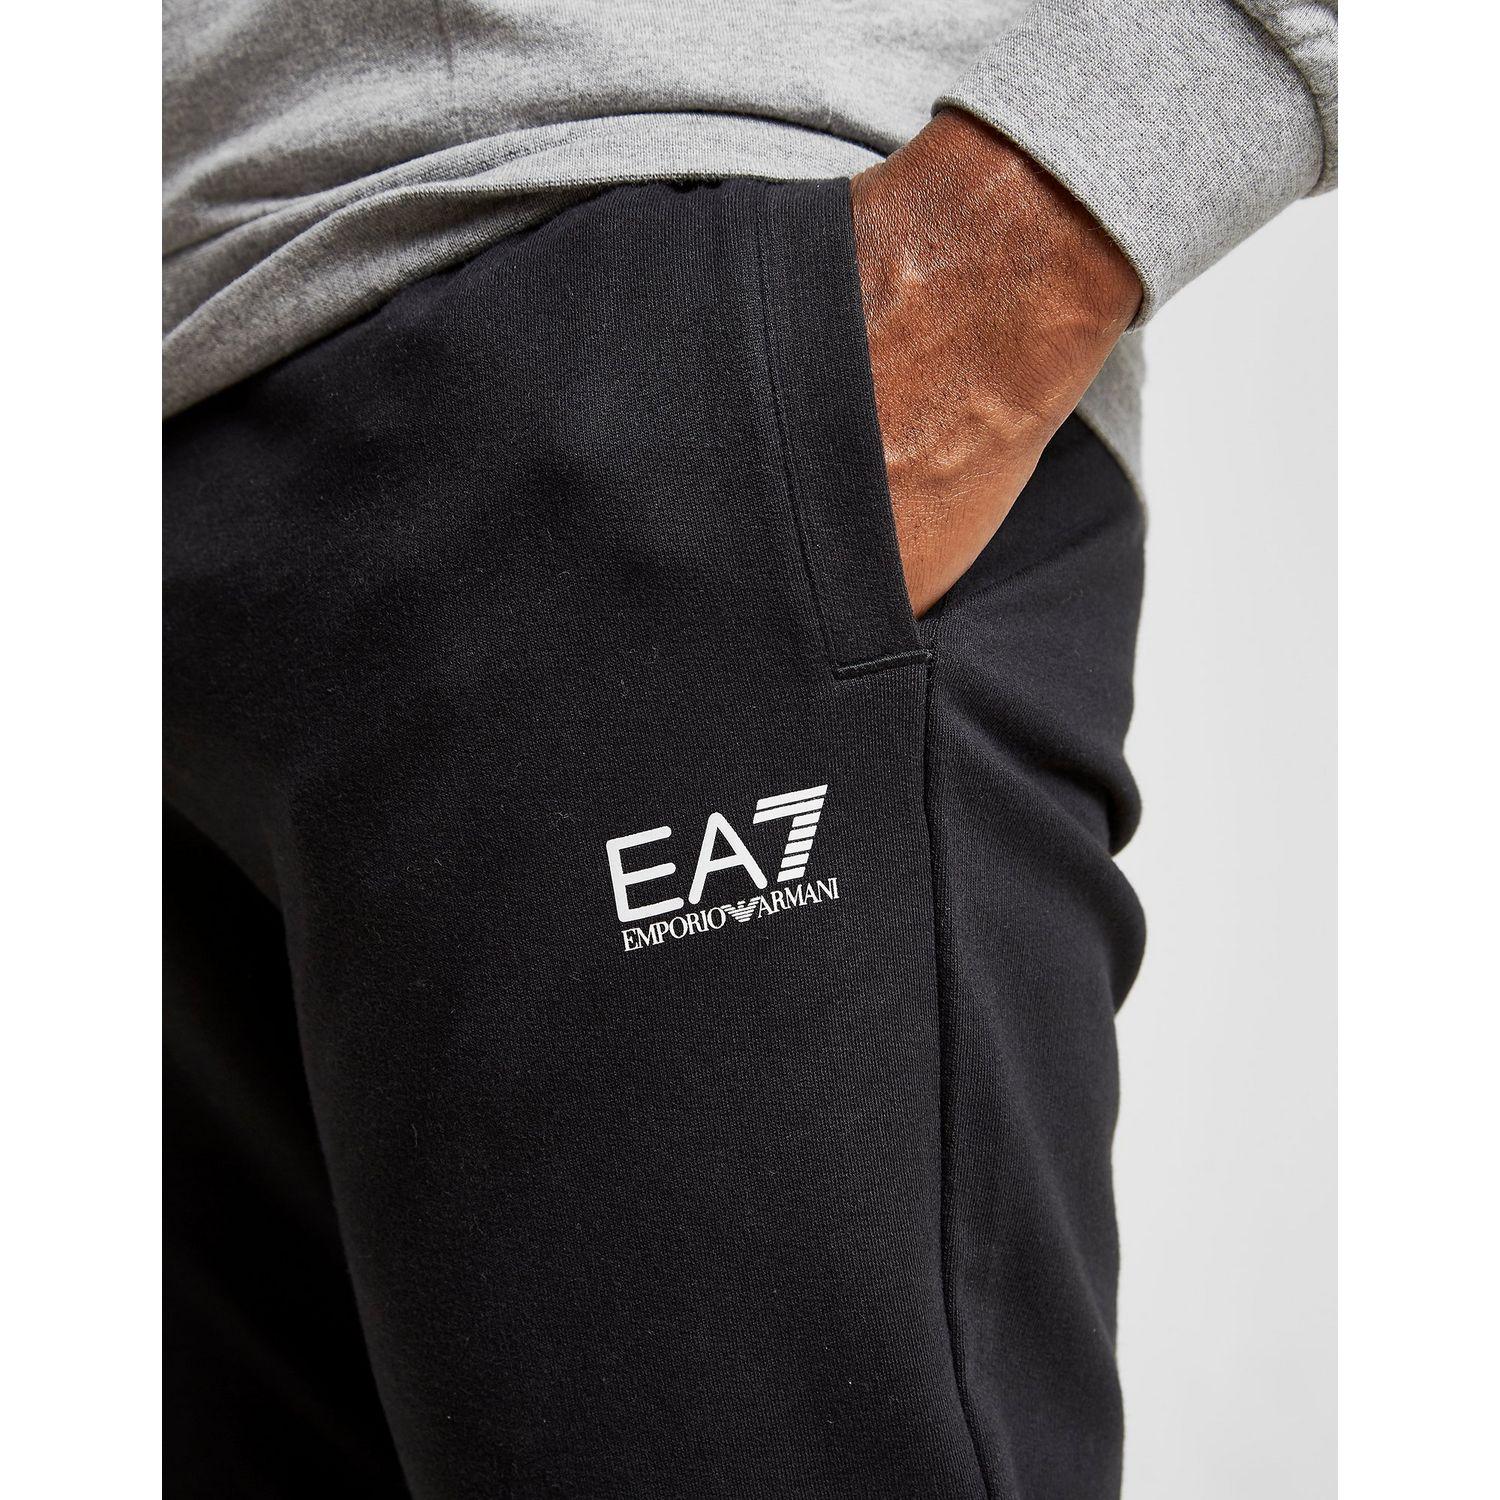 EA7 Cotton Core French Terry Tracksuit in Grey/Black (Gray) for Men - Lyst